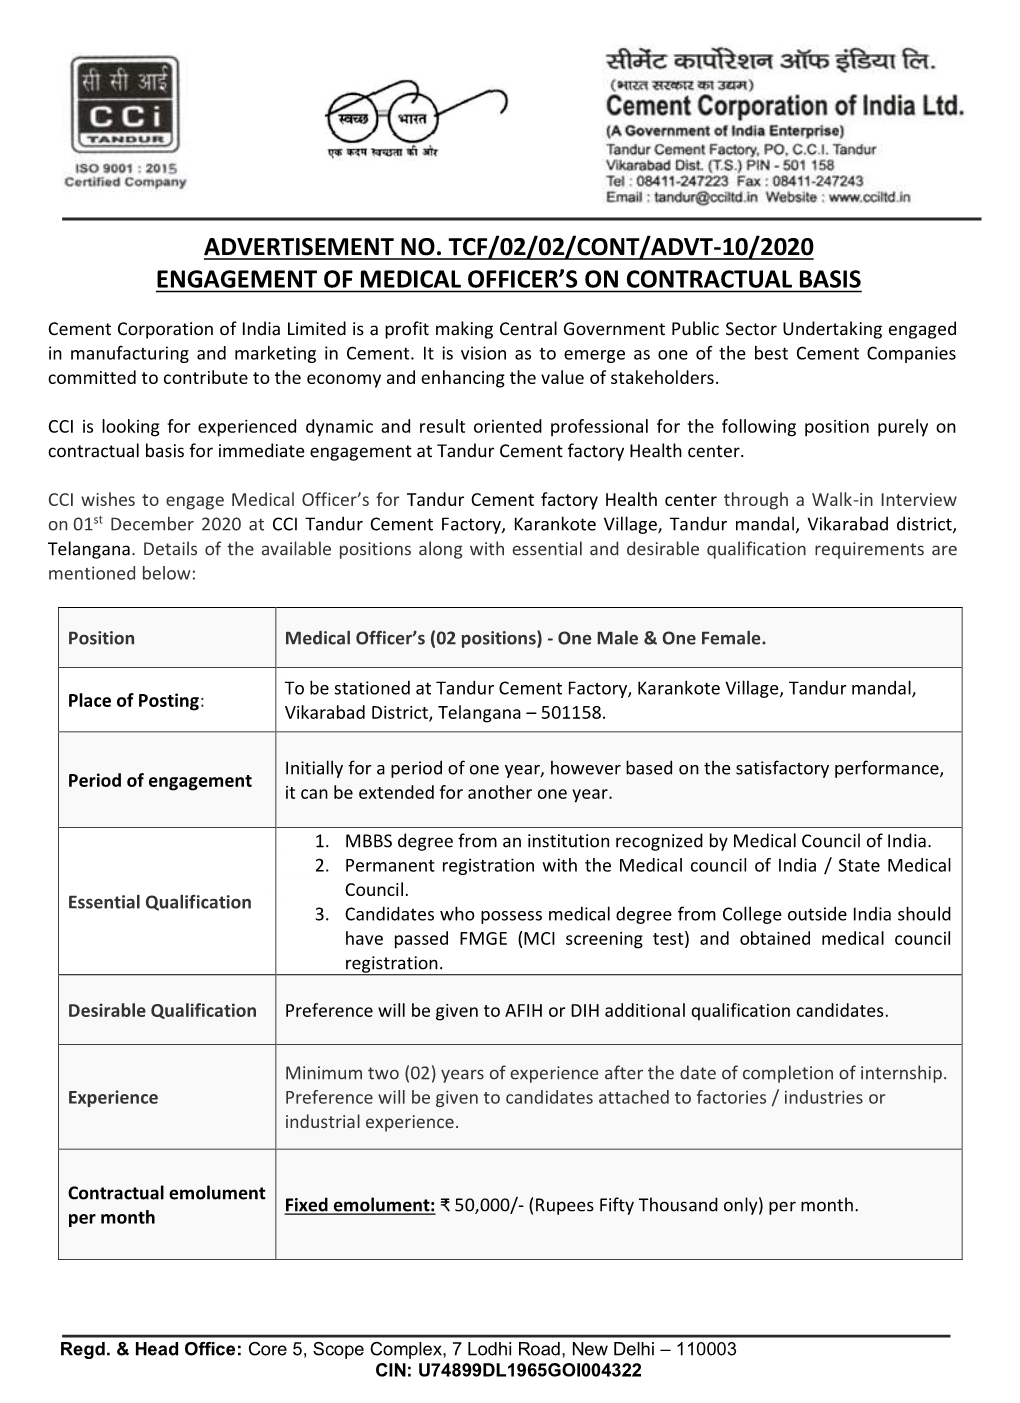 Advertisement No. Tcf/02/02/Cont/Advt-10/2020 Engagement of Medical Officer’S on Contractual Basis